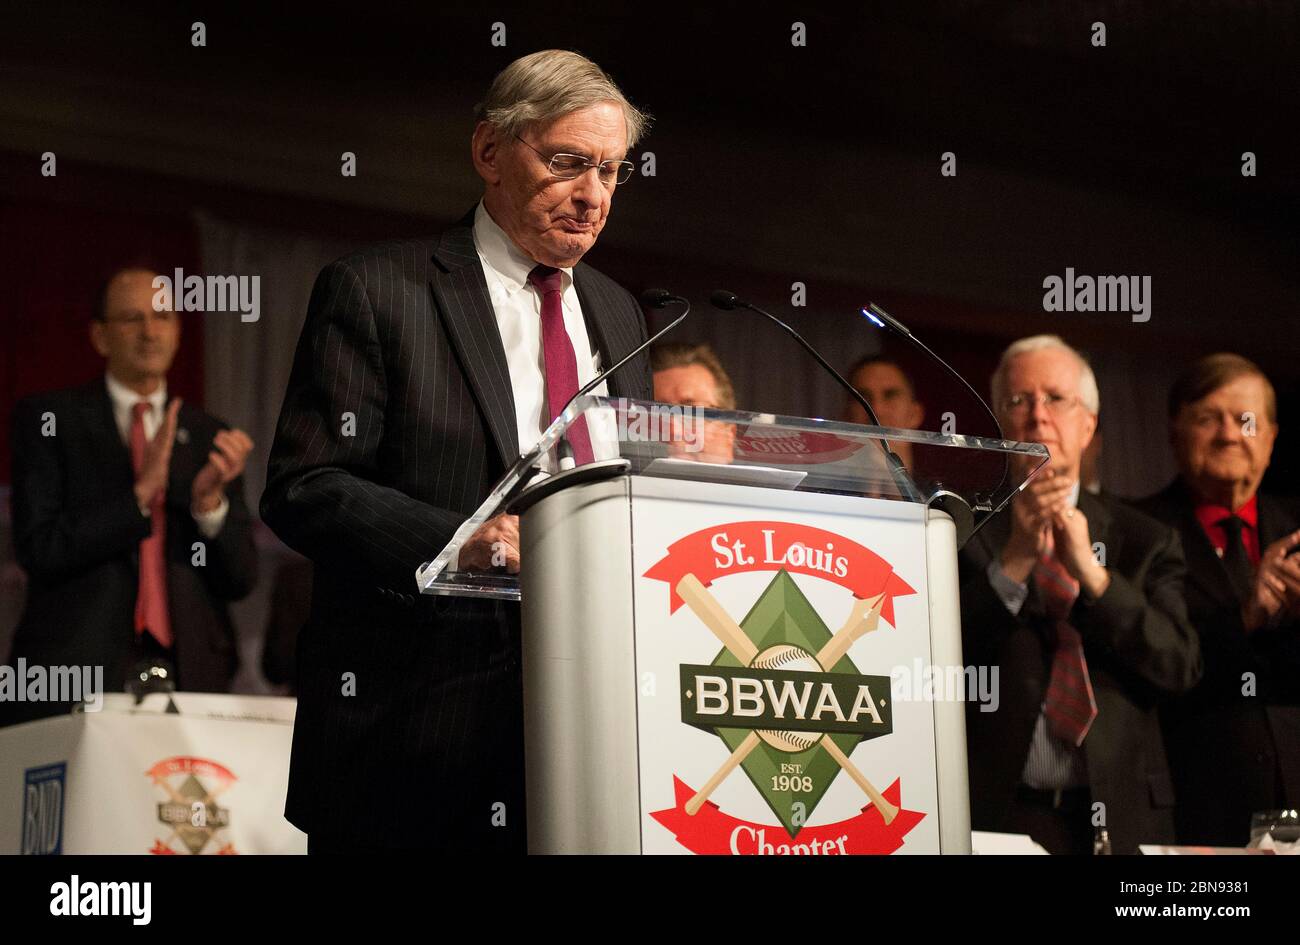 Bud Selig, Red Schoendienst  receive awards at 2015 St. Louis BBWAA 57th annual Baseball Writers Dinner. Stock Photo